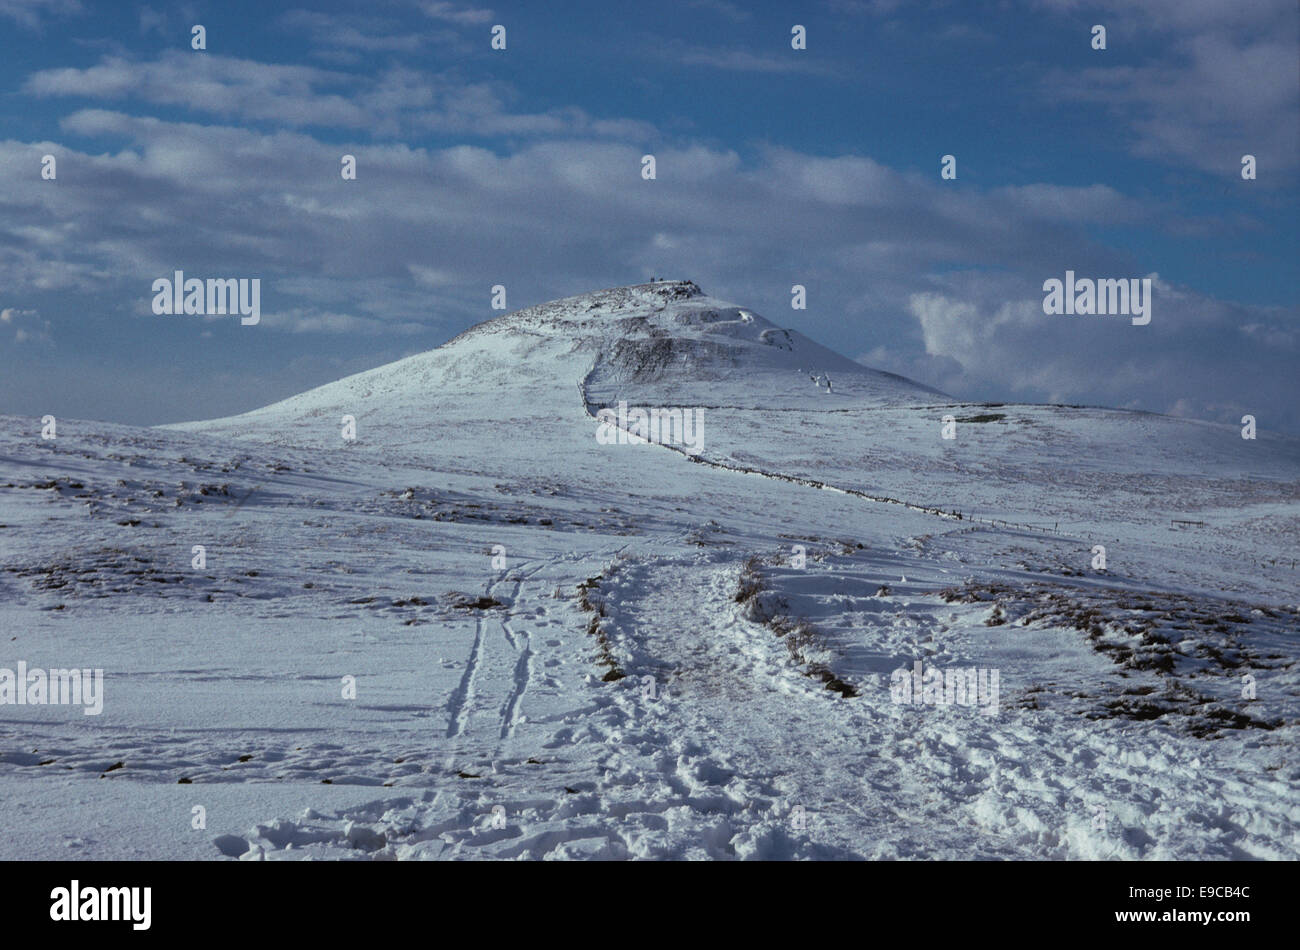 Shutlingsloe hill covered in snow near Wildboarclough Macclesfield in the Peak District.  There is a track in the foreground. Stock Photo